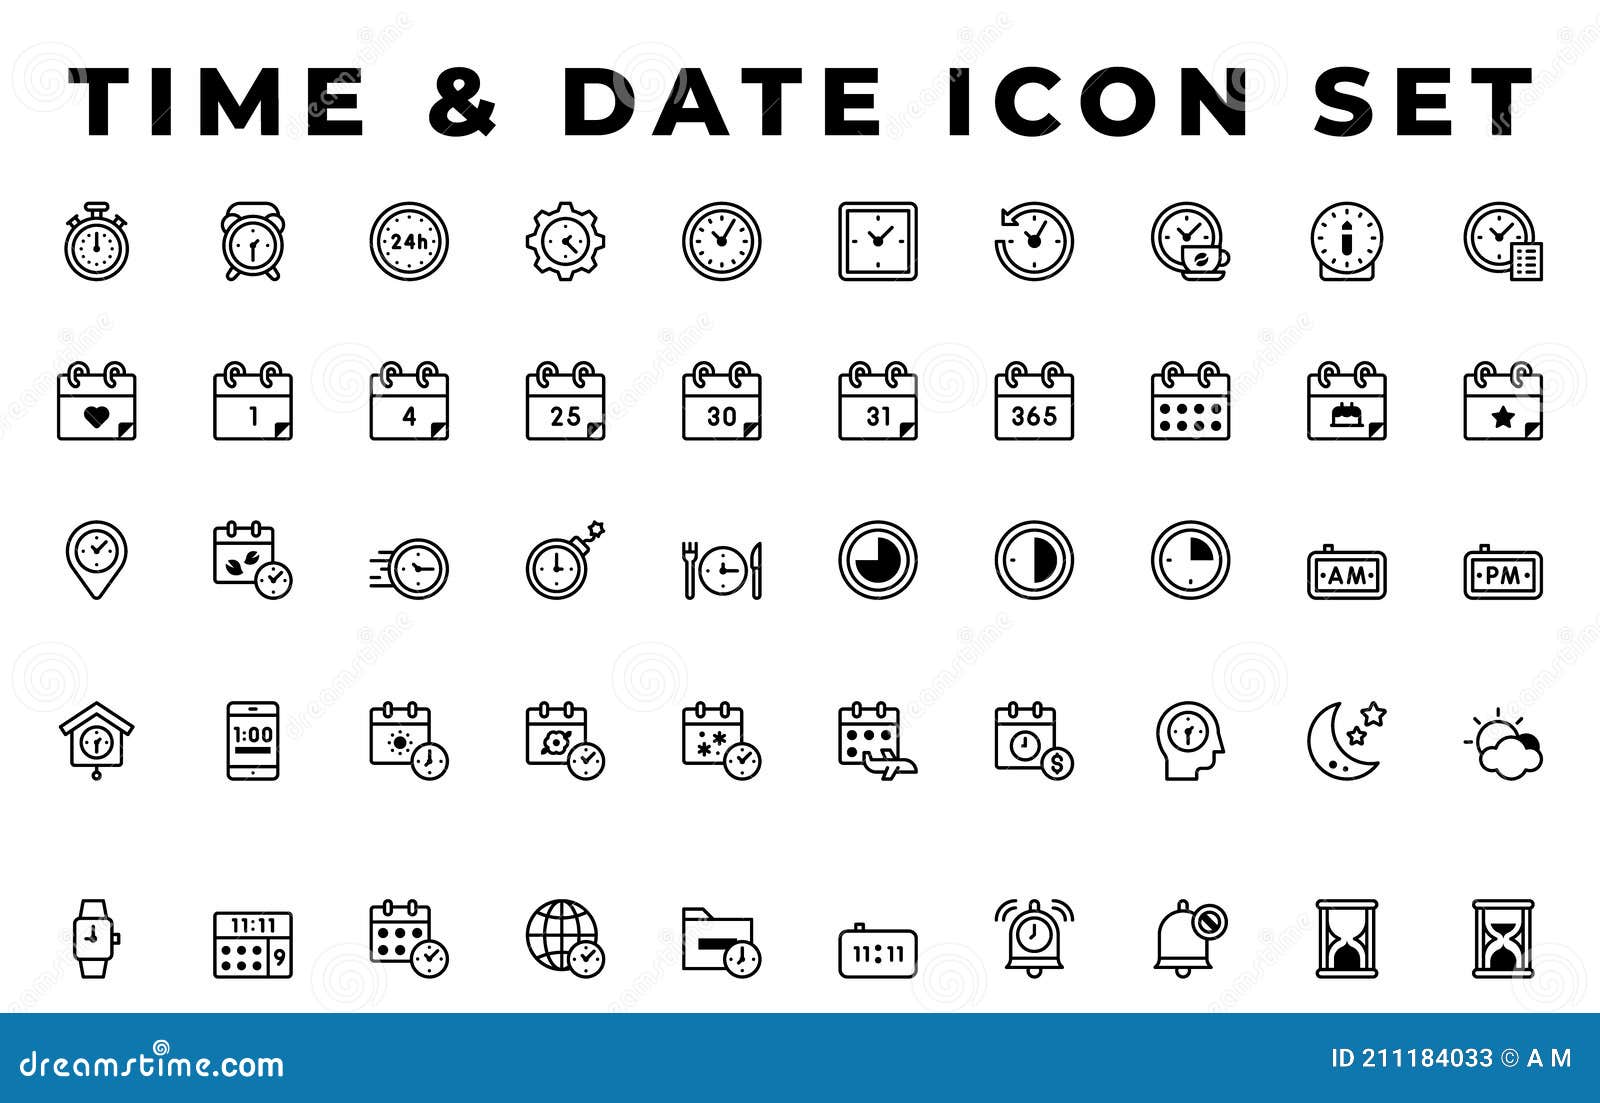 time and date lineal icon set pack, time mangement icon set,  eps file